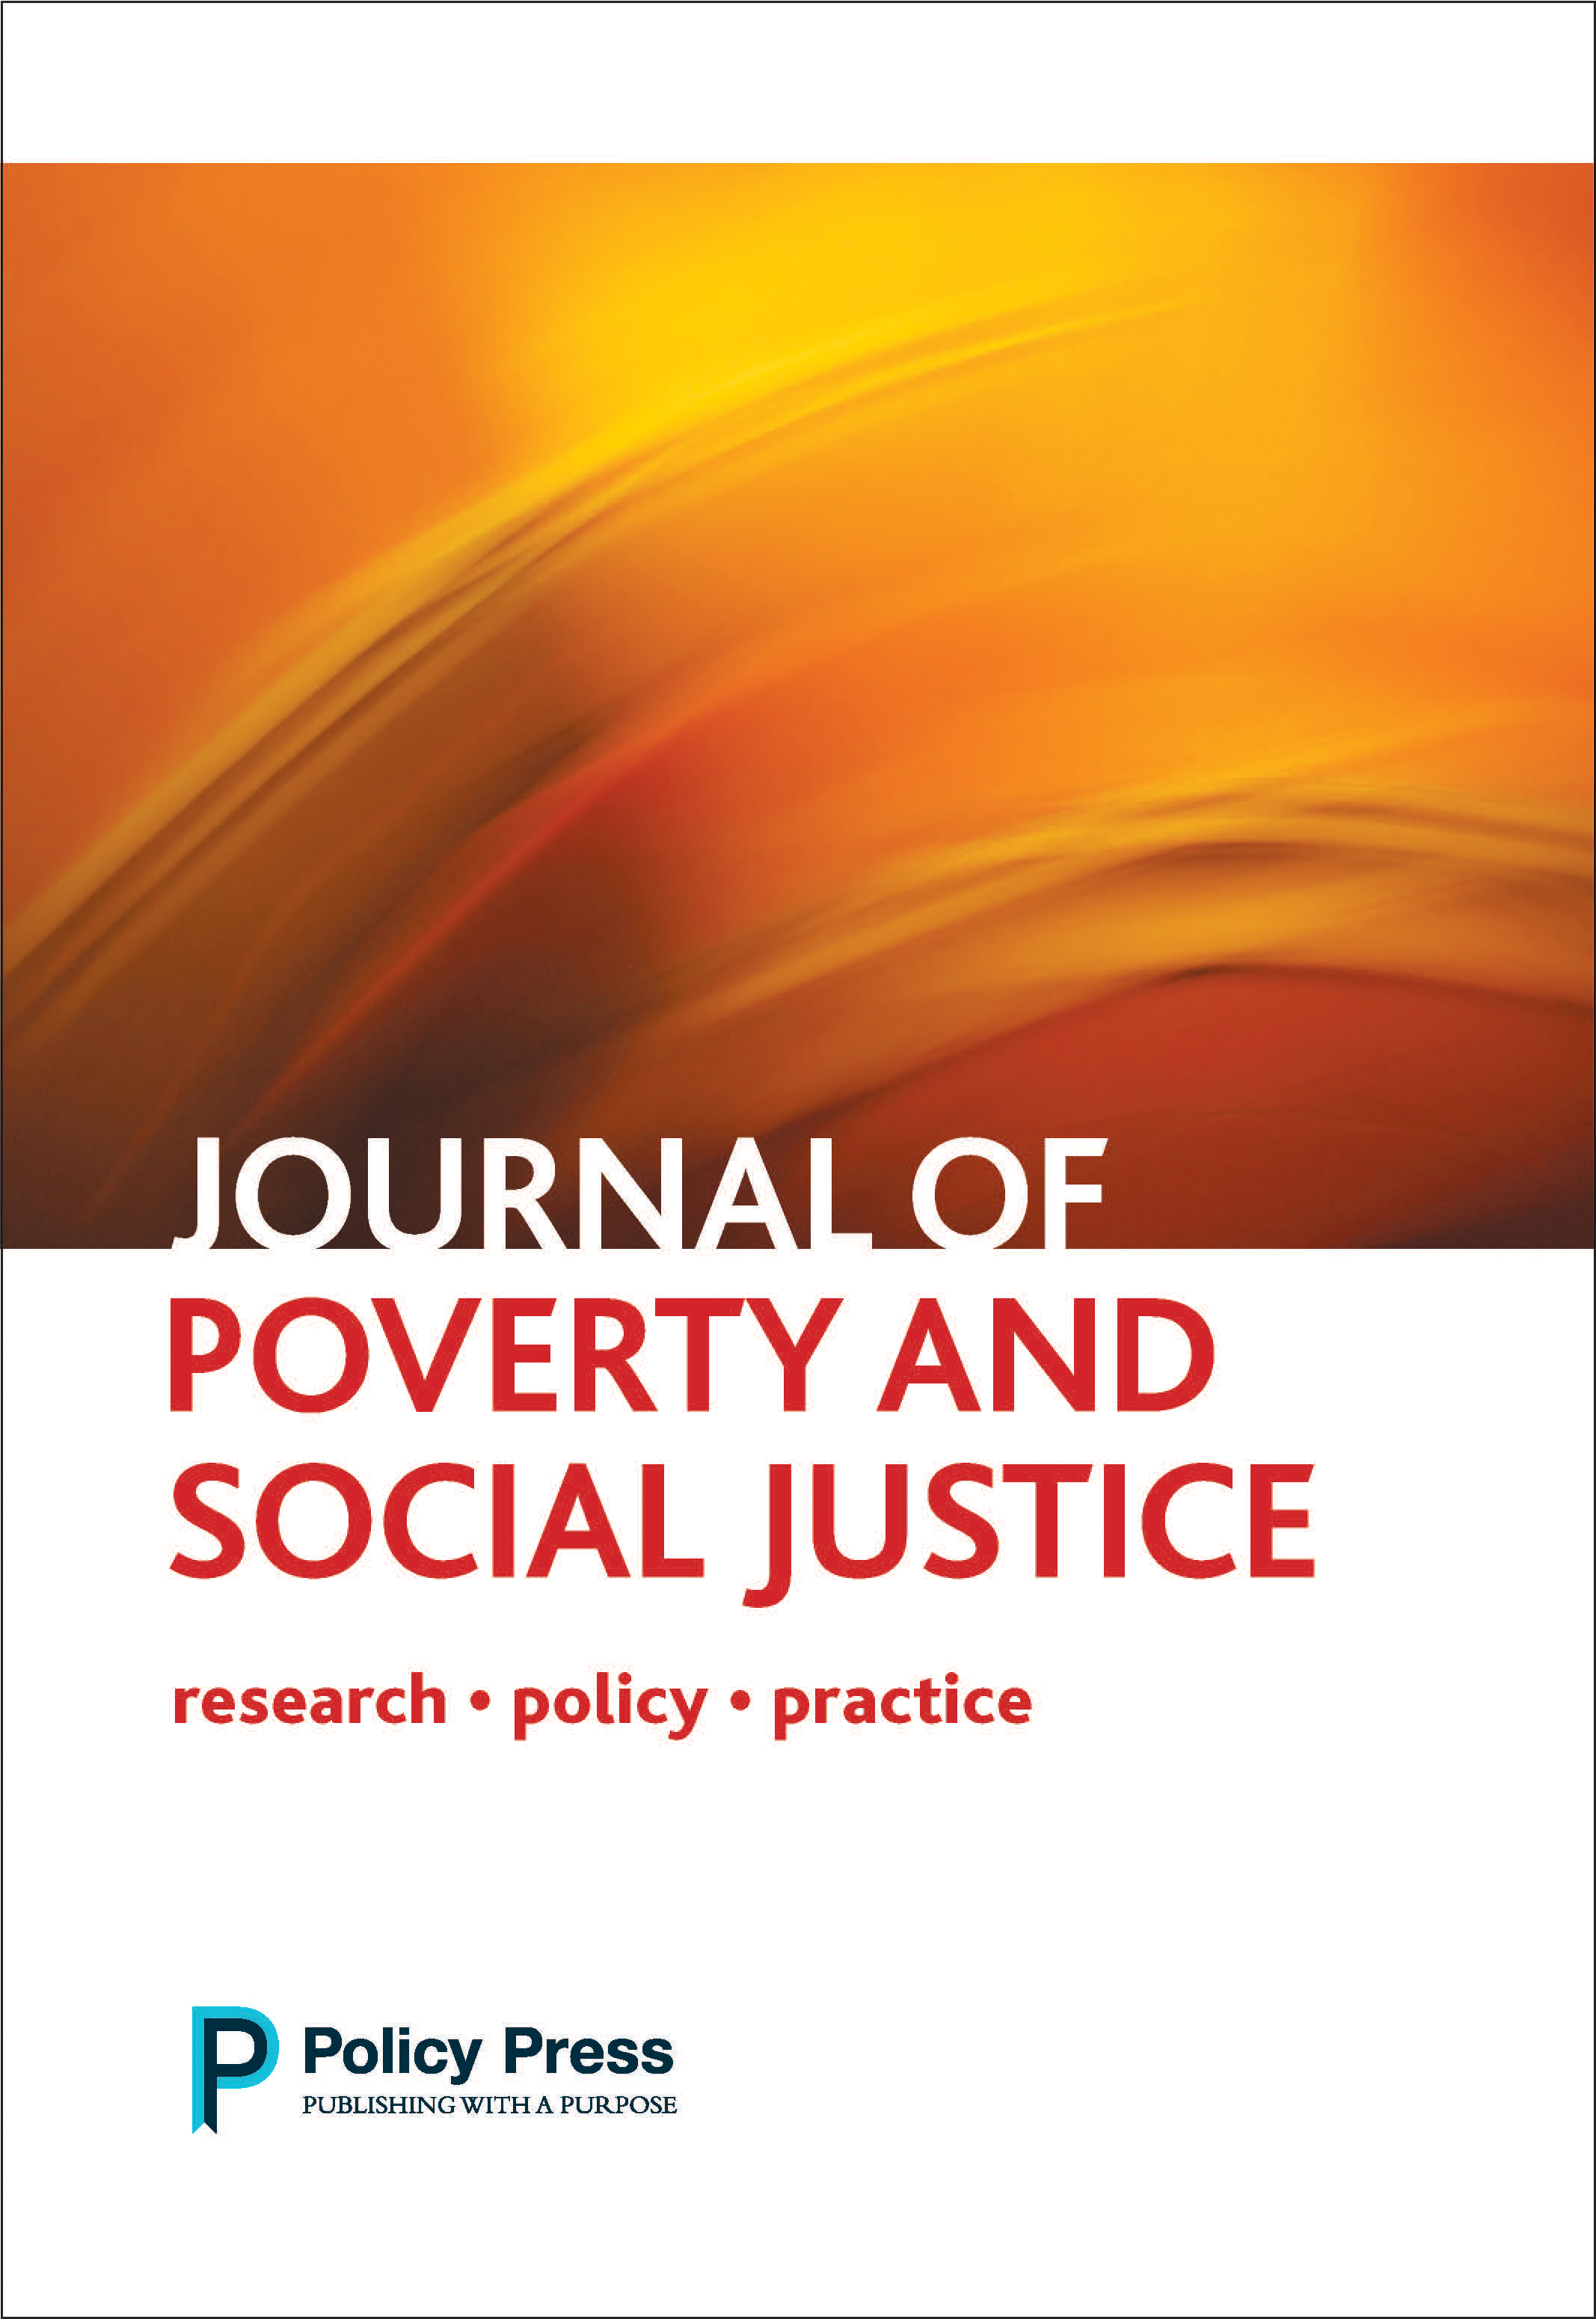 Journal of Poverty and Social Justice article reveals impact of a Special Rapporteur visit